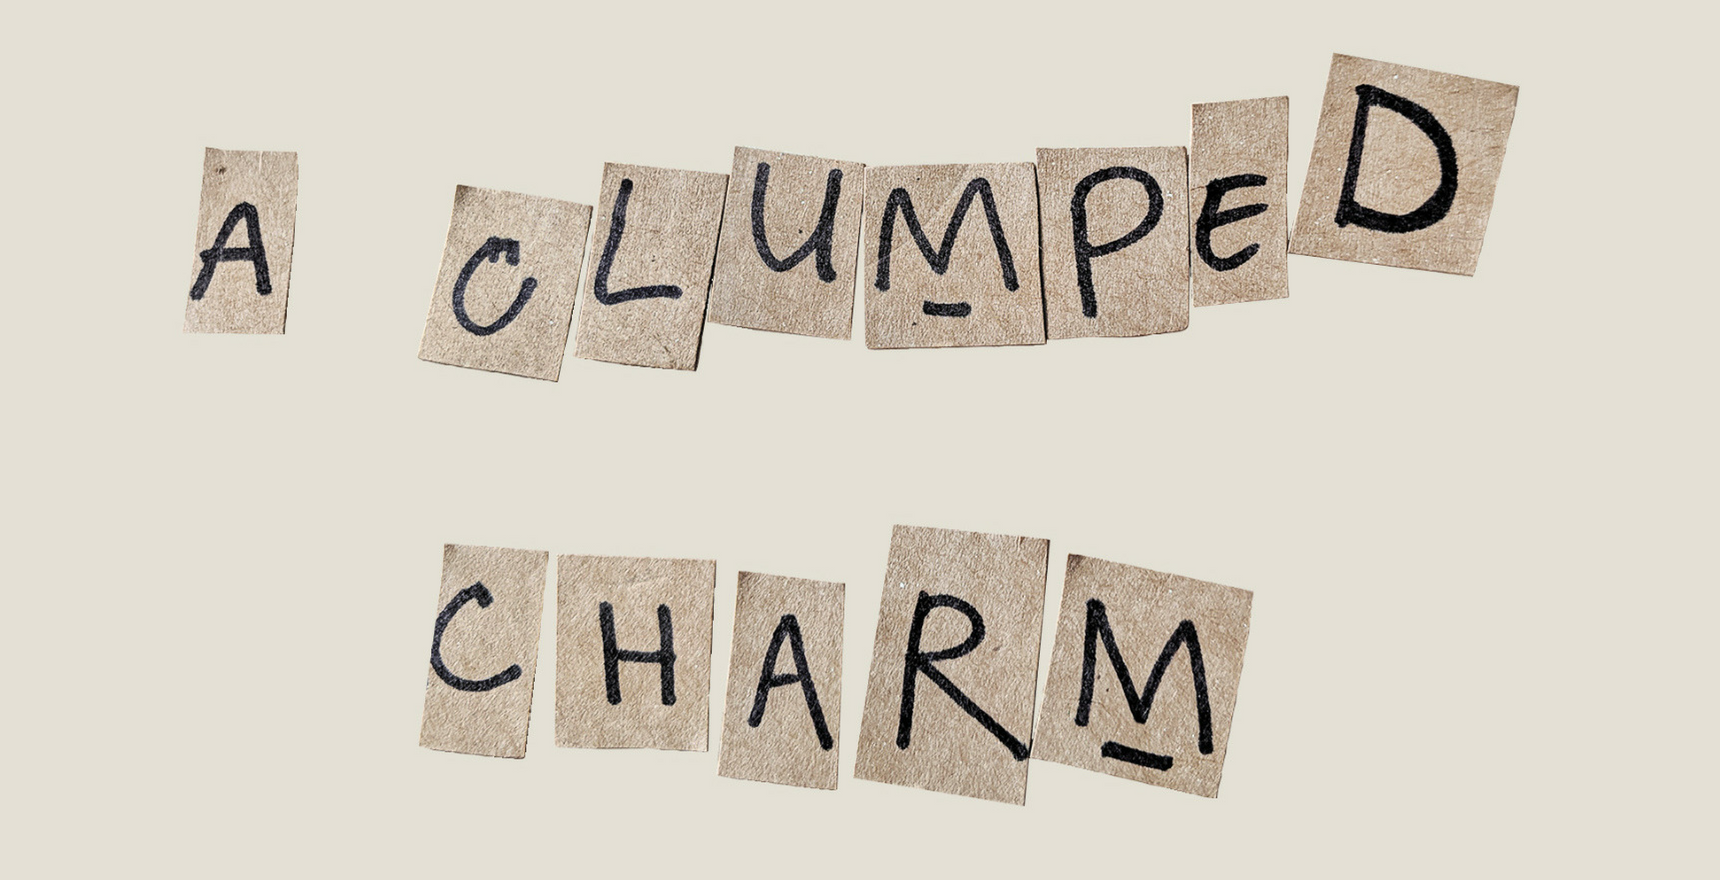 A Clumped Charm - Exhibition